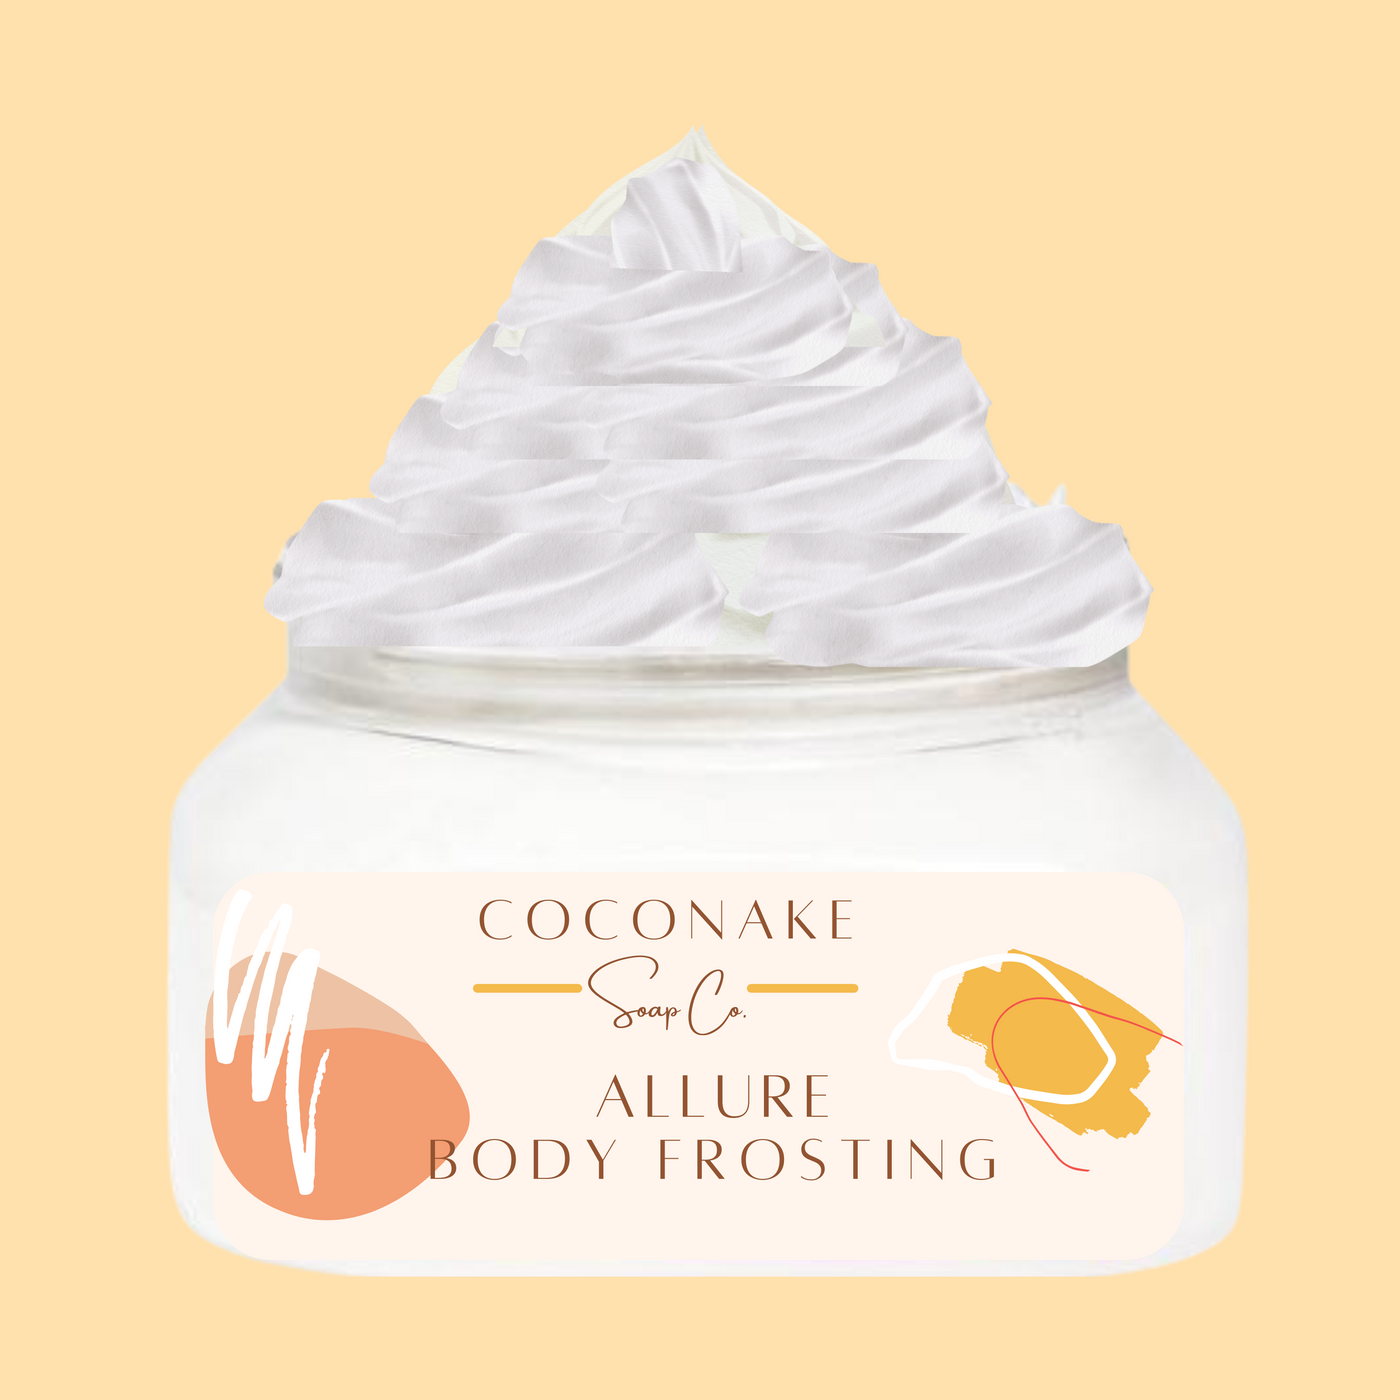 Allure Body Frosting